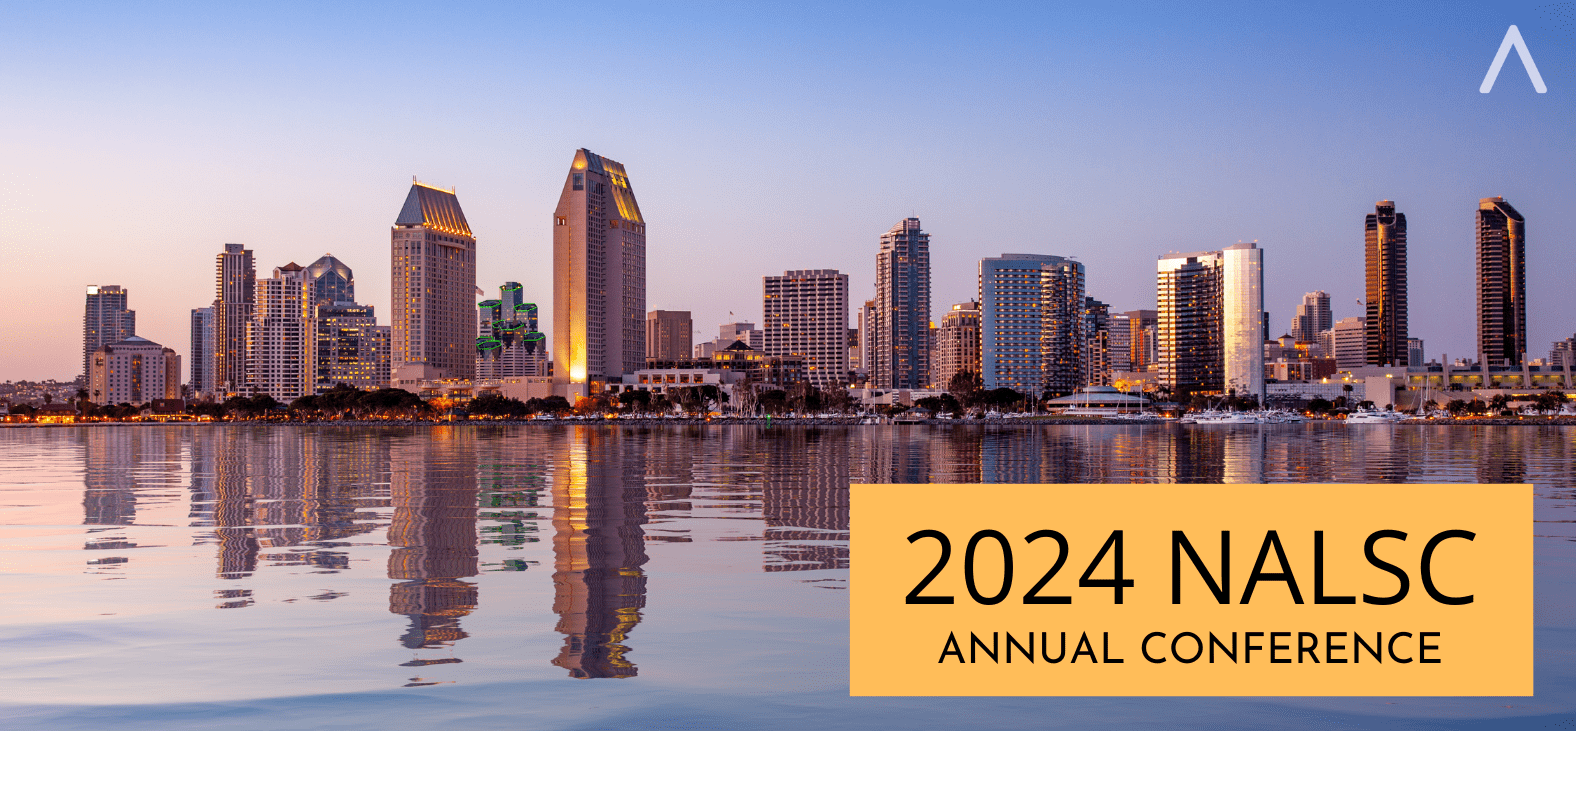 Come see us at the NALSC 2024 Annual Conference in San Diego, February 29 – March 2